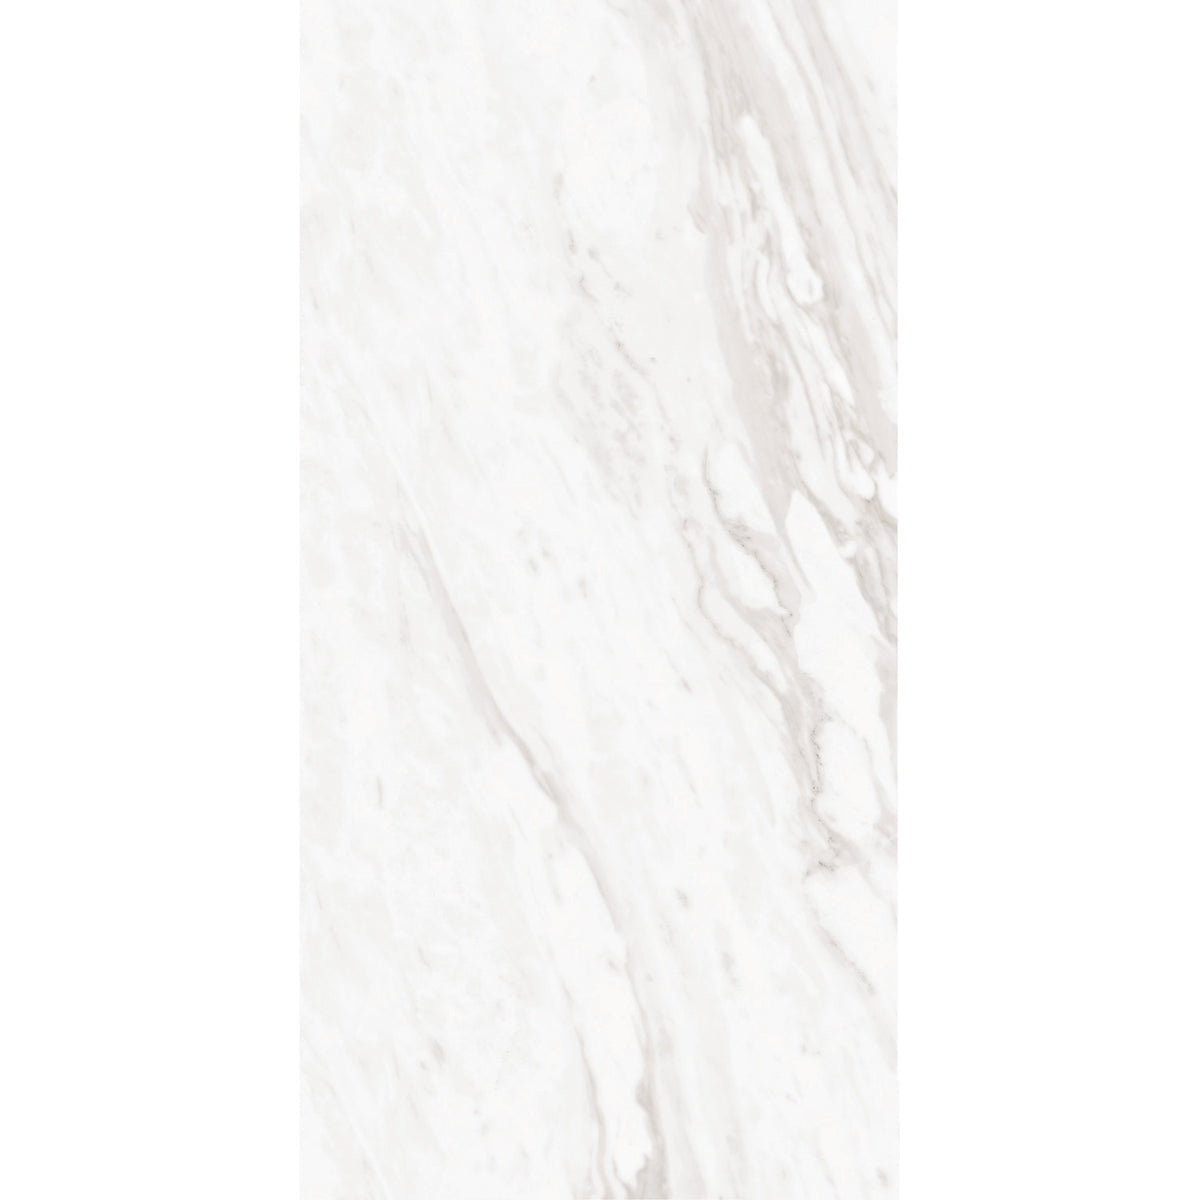 Daltile - Perpetuo - 12 in. x 24 in. Glazed Porcelain Floor Tile - Timeless White Polished 4